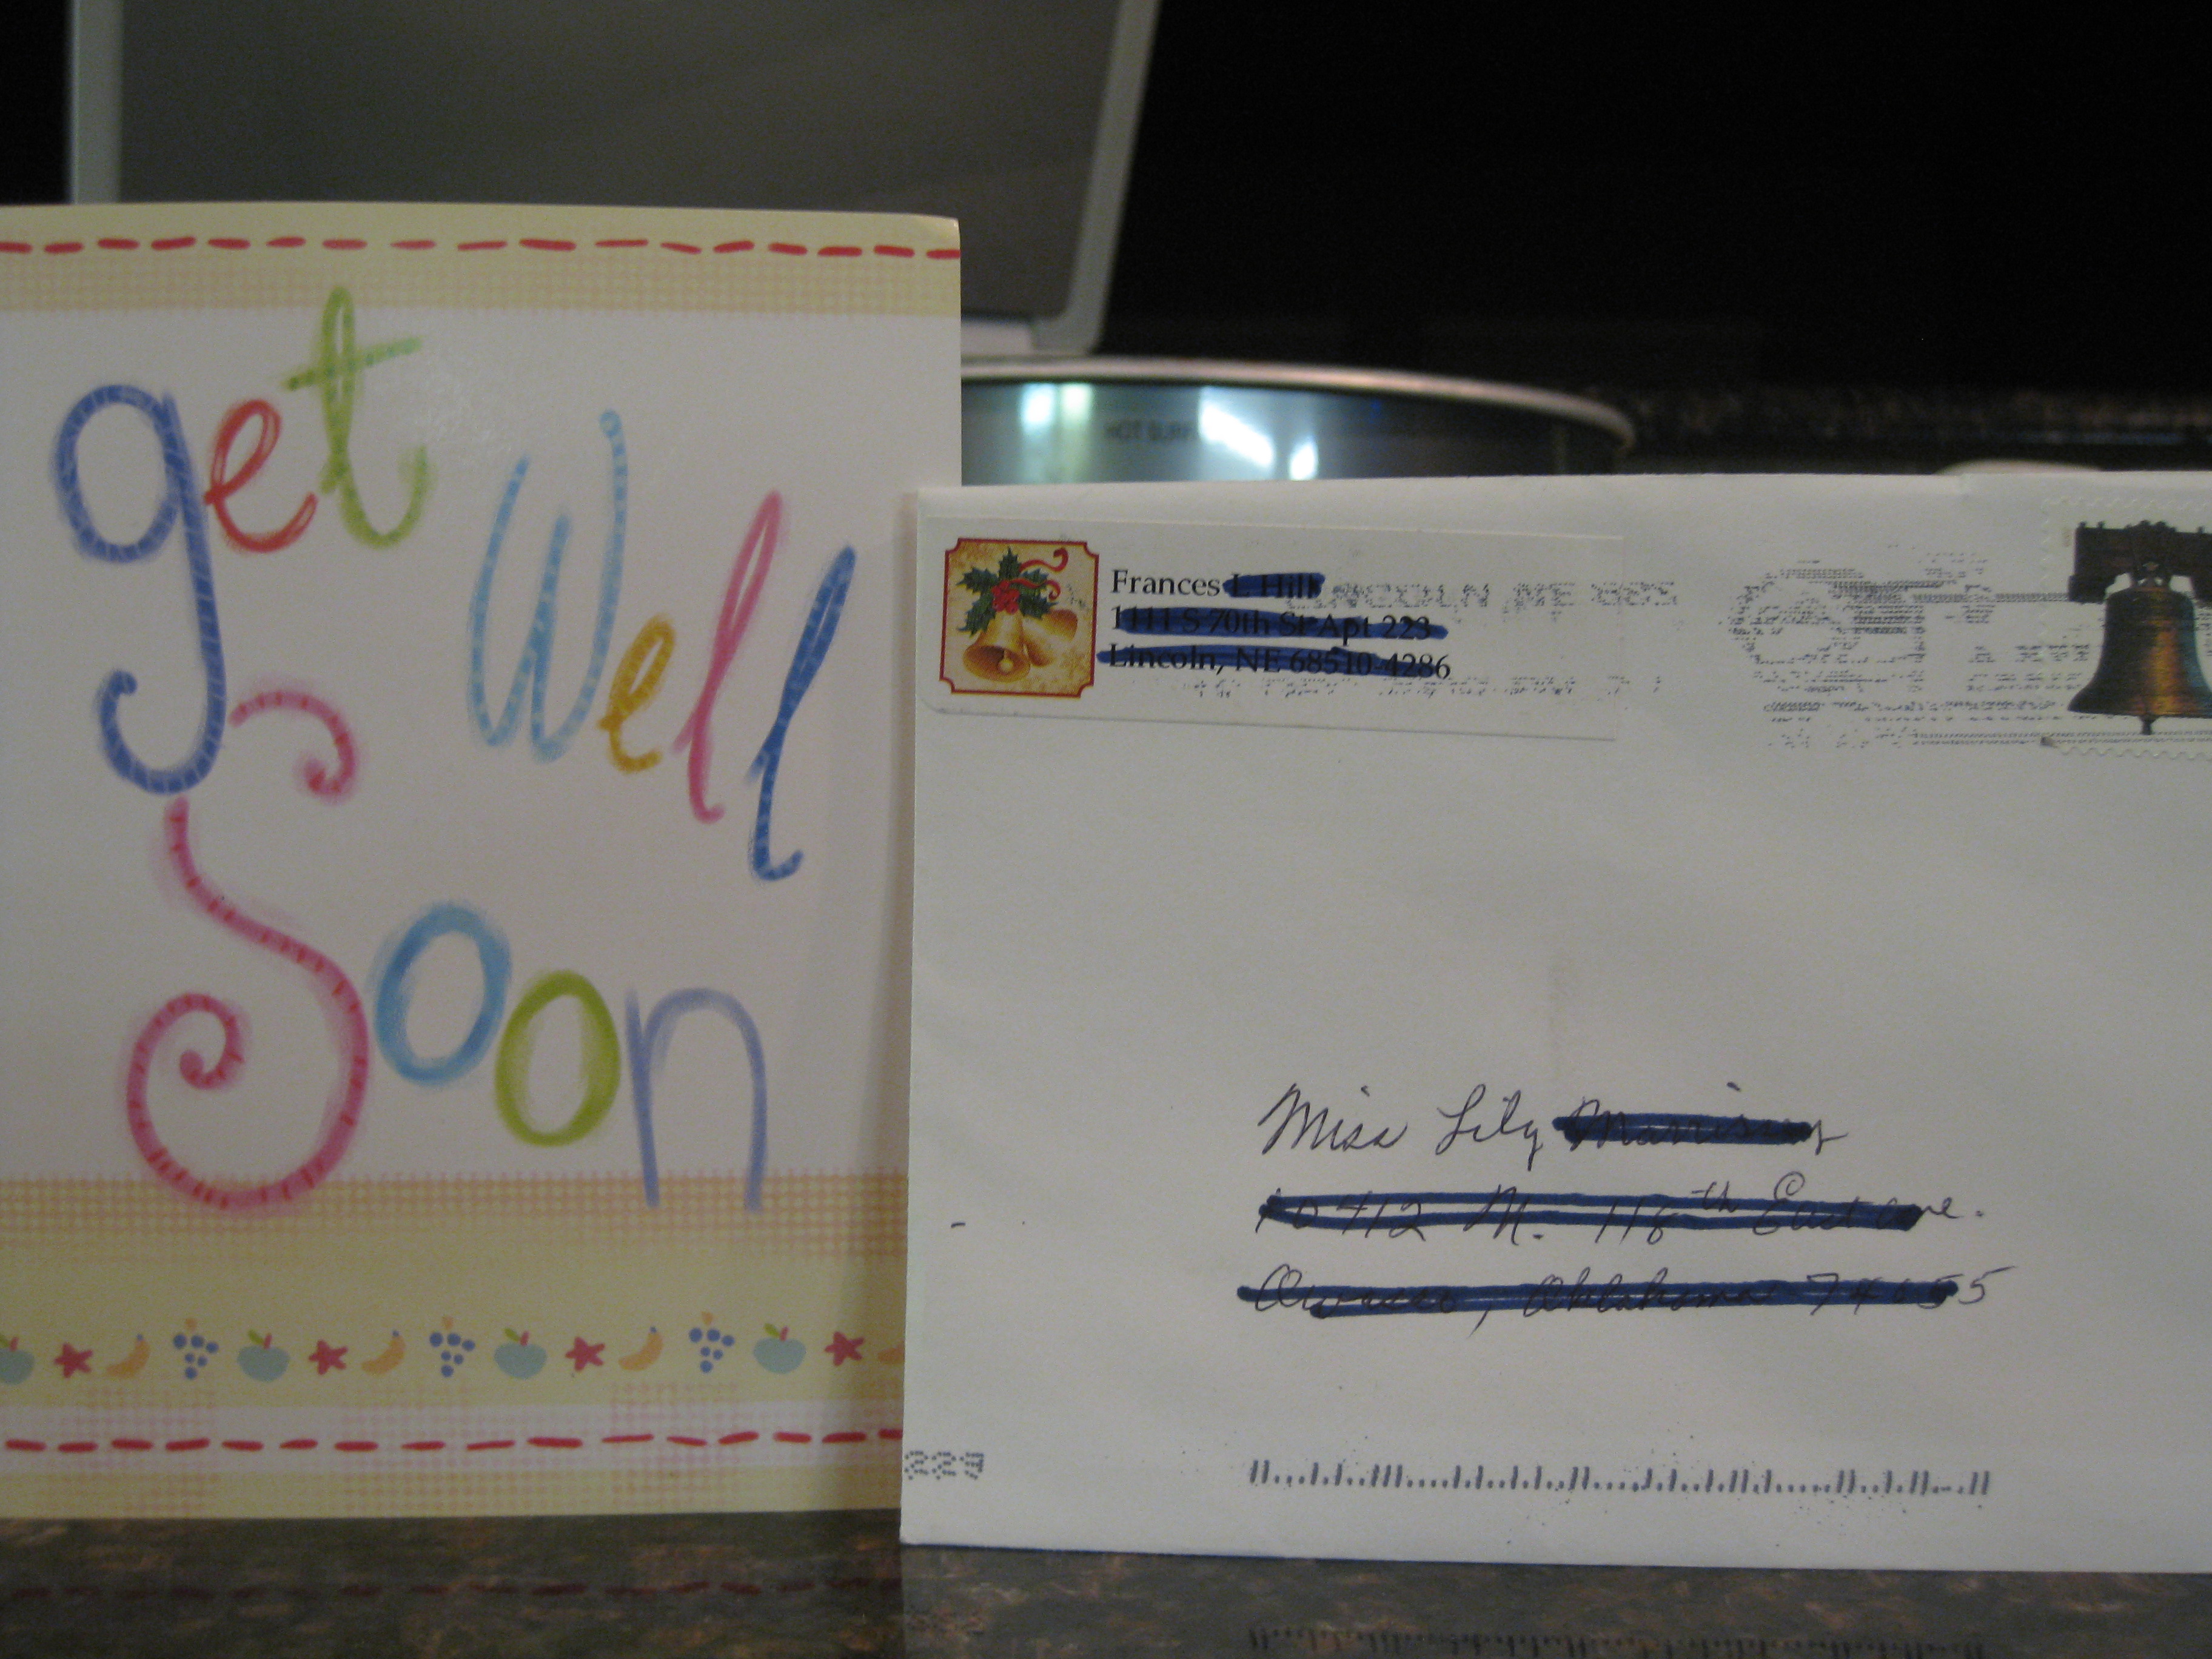 Mail addressed to "Miss Lily M." -- a Get Well Soon card from Grandma H